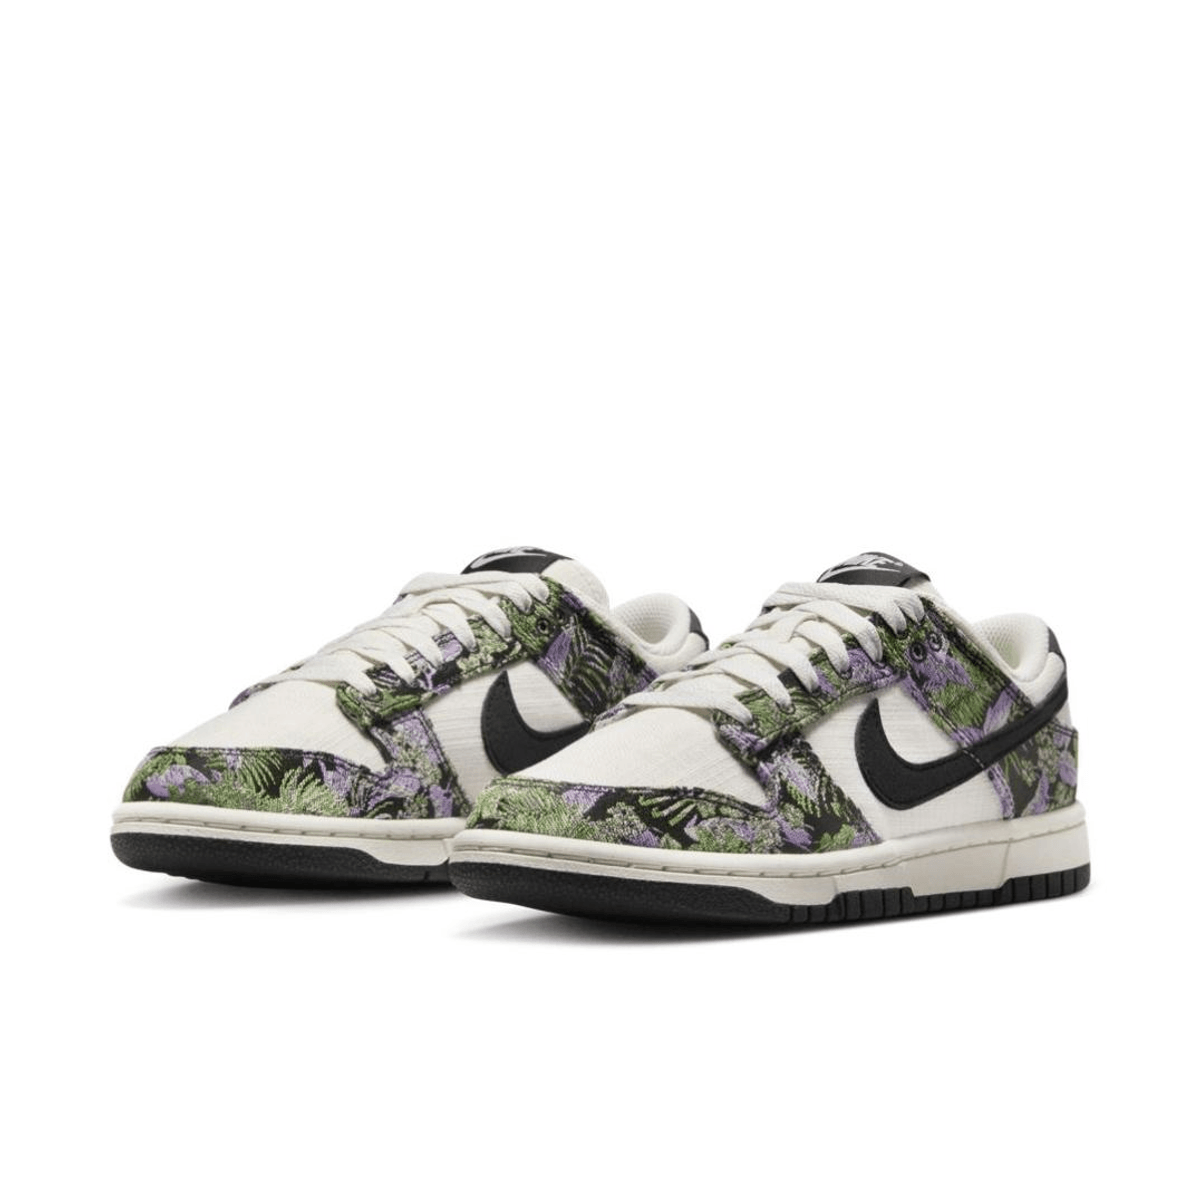 The Nike Dunk Low Floral Tapestry Is A Vintage-Inspired Delight